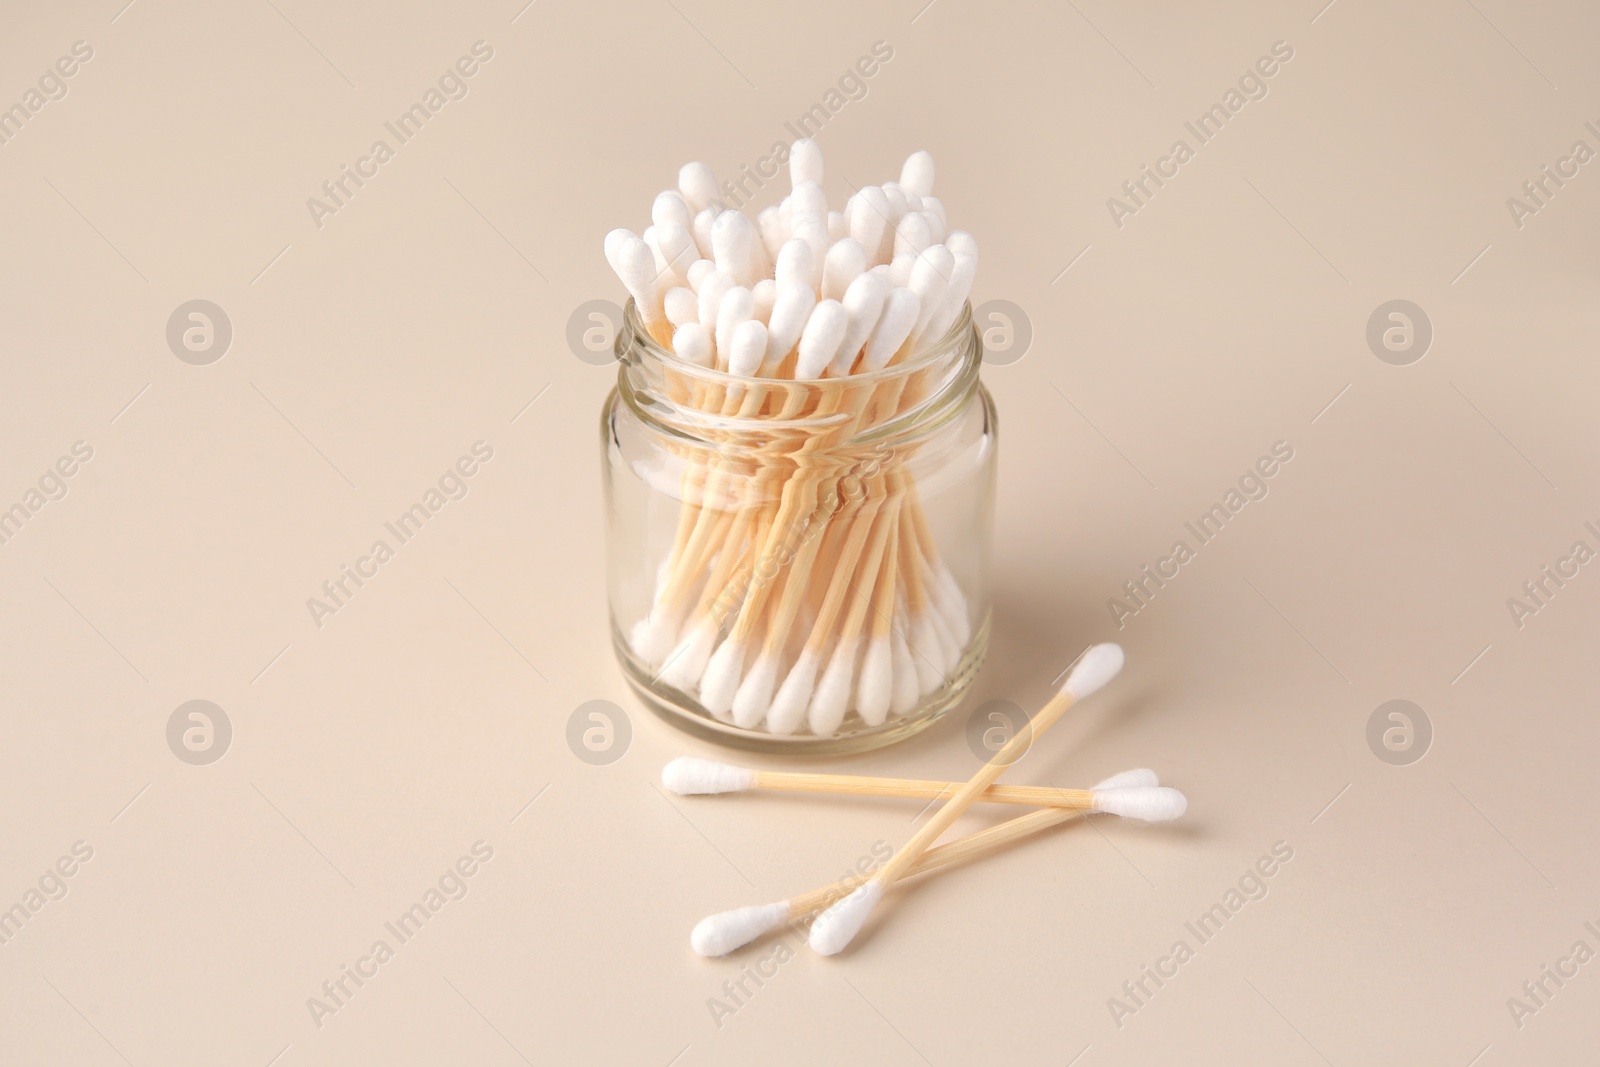 Photo of Jar and clean cotton buds on beige background